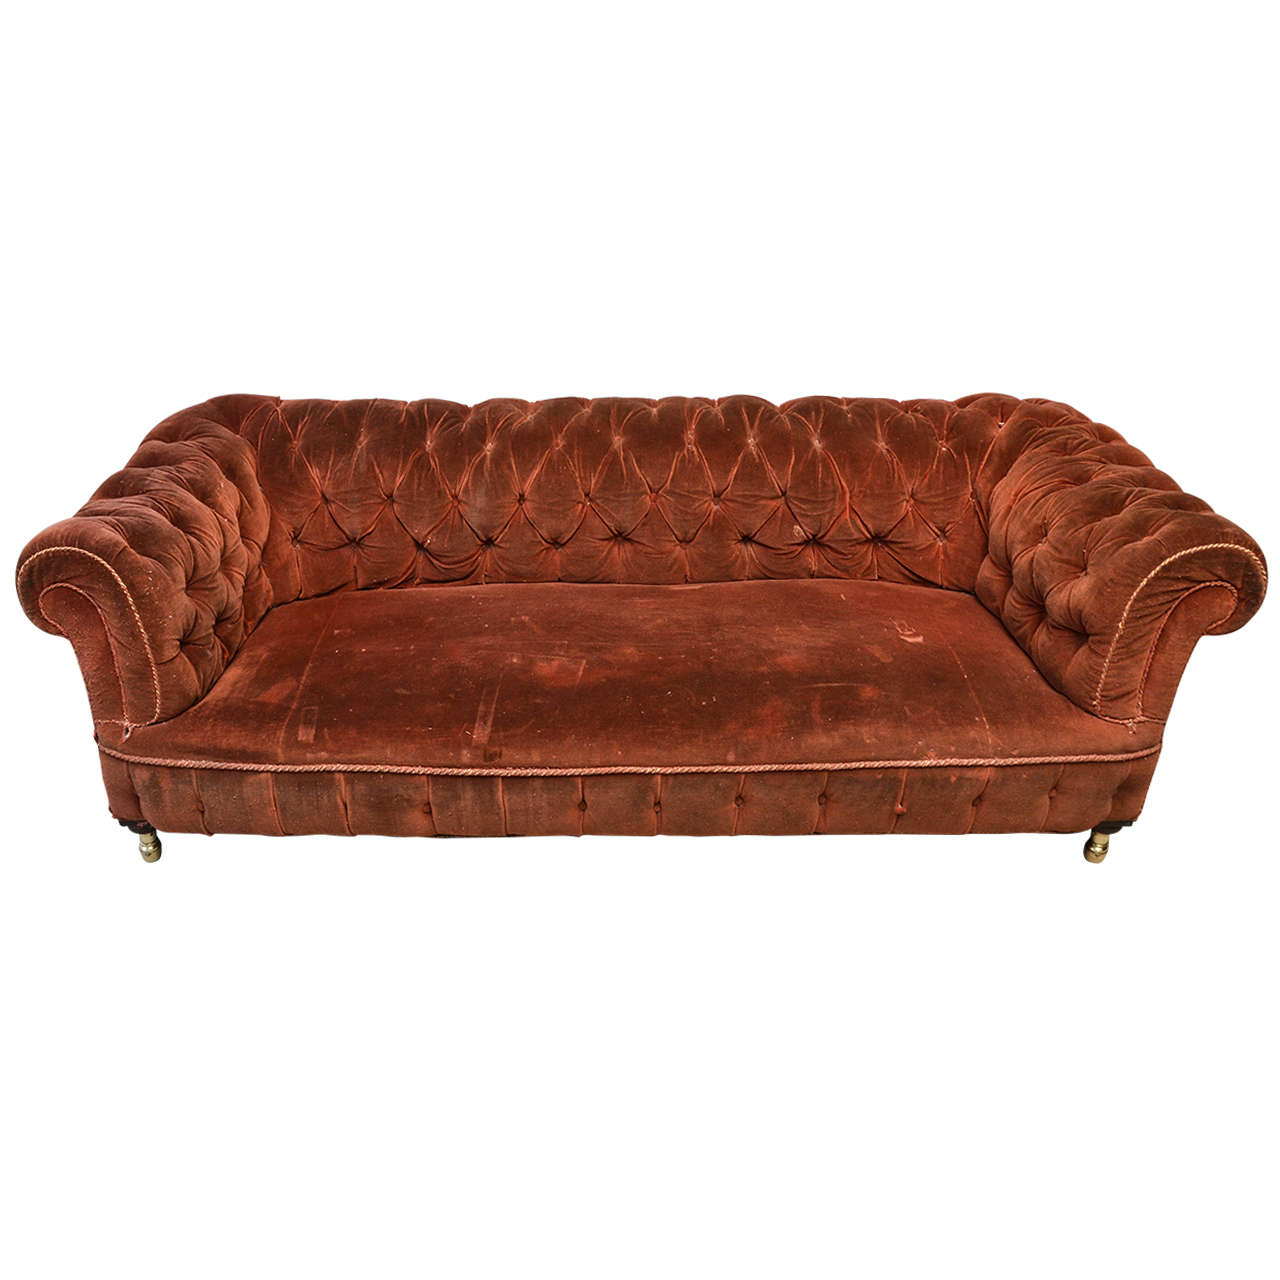 English Edwardian Chesterfield Sofa For Sale At 1stdibs